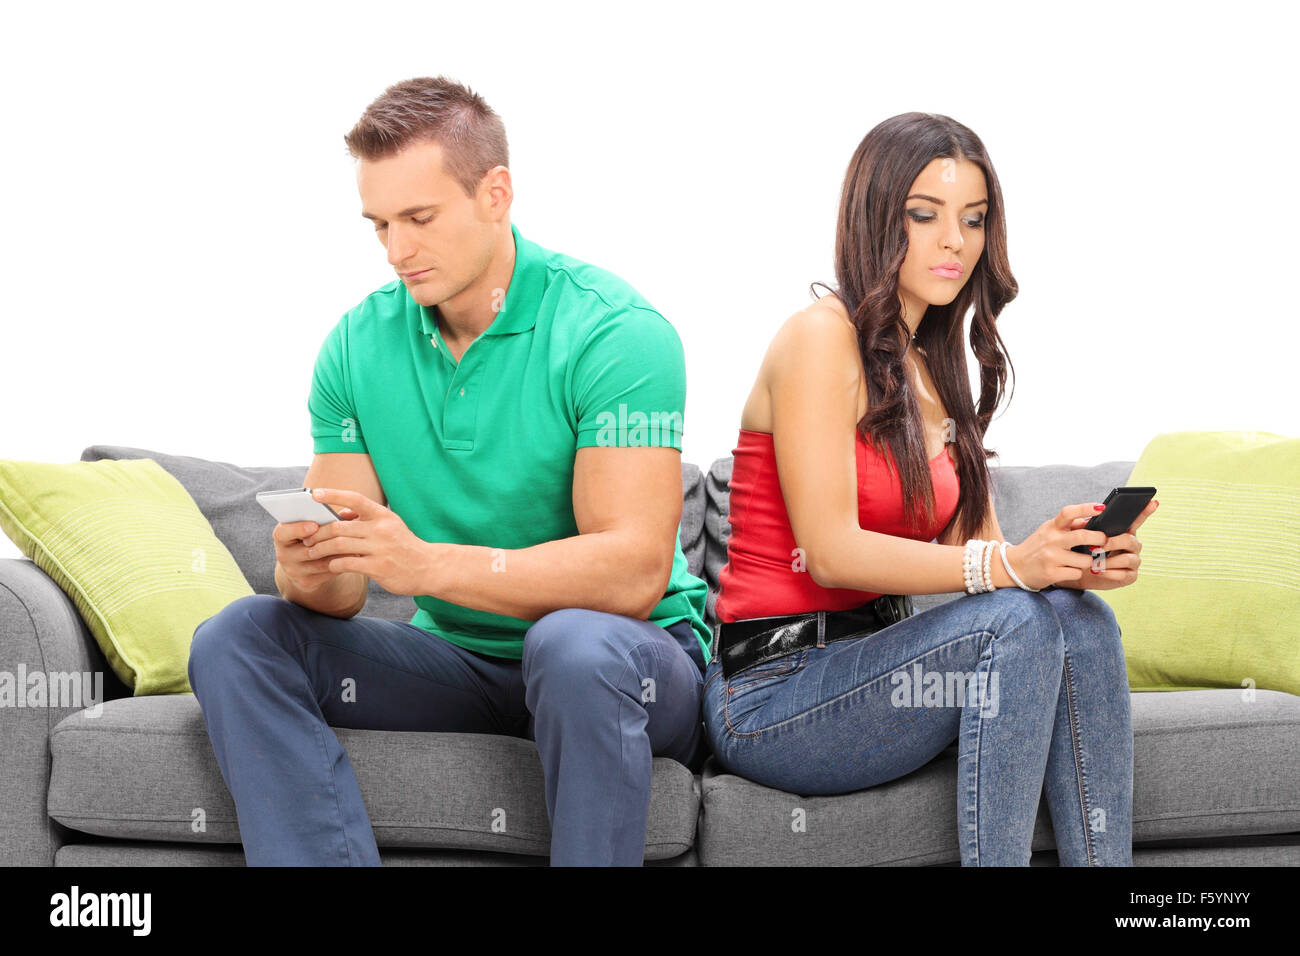 Young couple looking at their cell phones and ignoring each other seated on a gray sofa isolated on white background Stock Photo